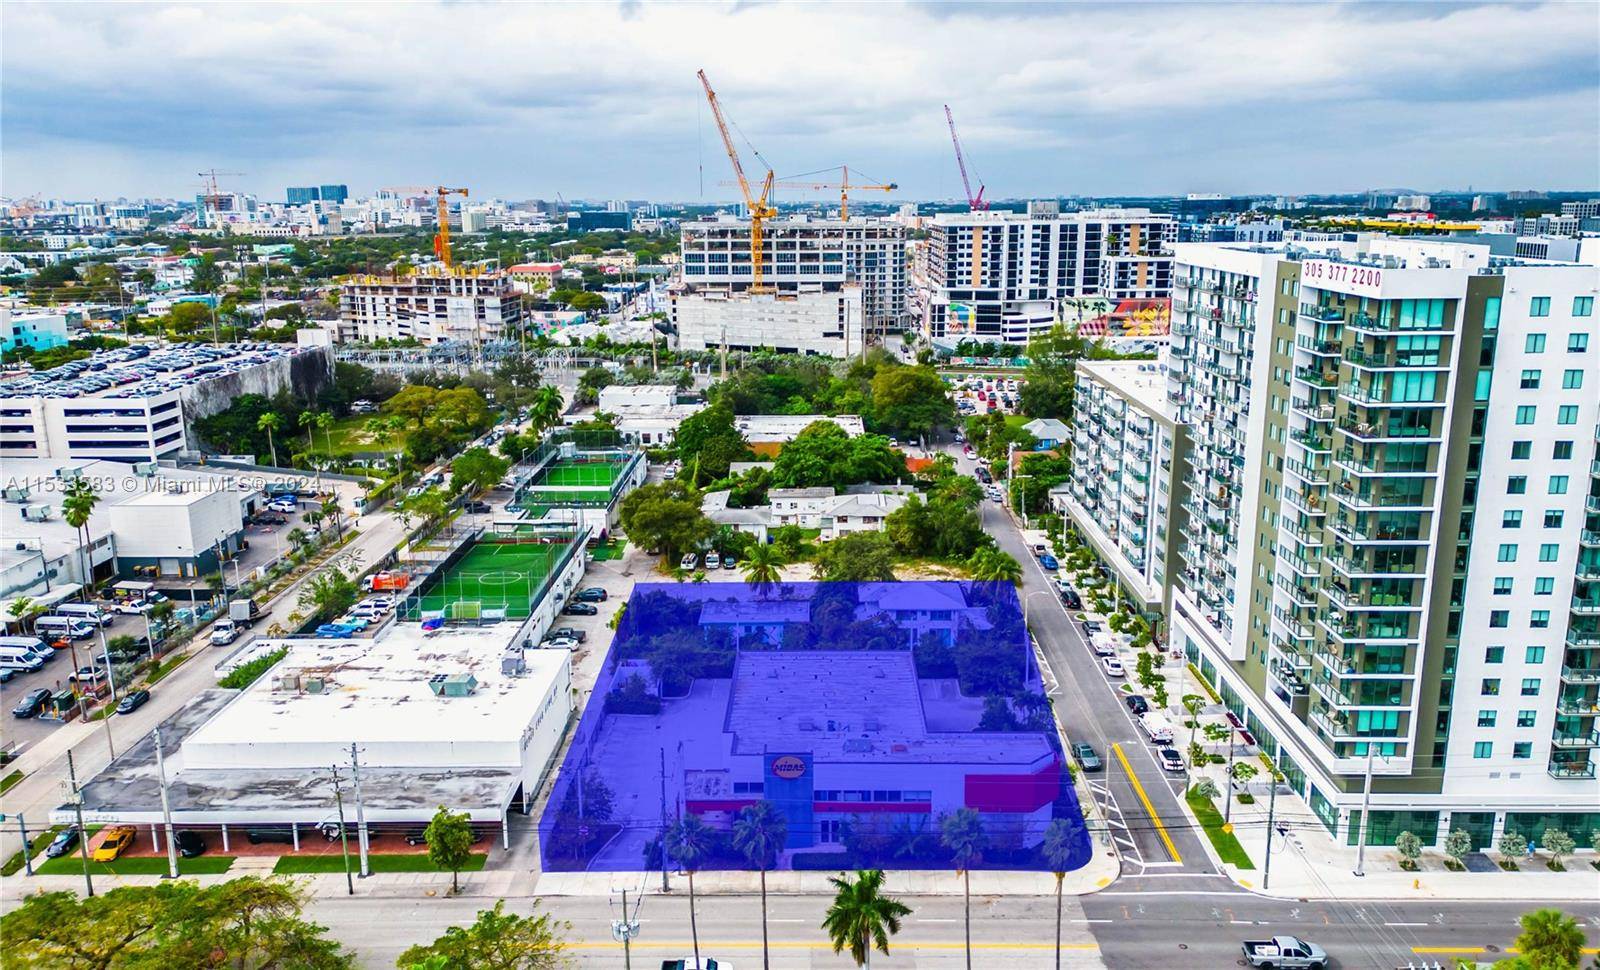 We are proud to exclusively present a newly packaged covered land assemblage in the high demand lower NE 2nd Avenue quadrant of Edgewater, just north of the Arts Entertainment District ...